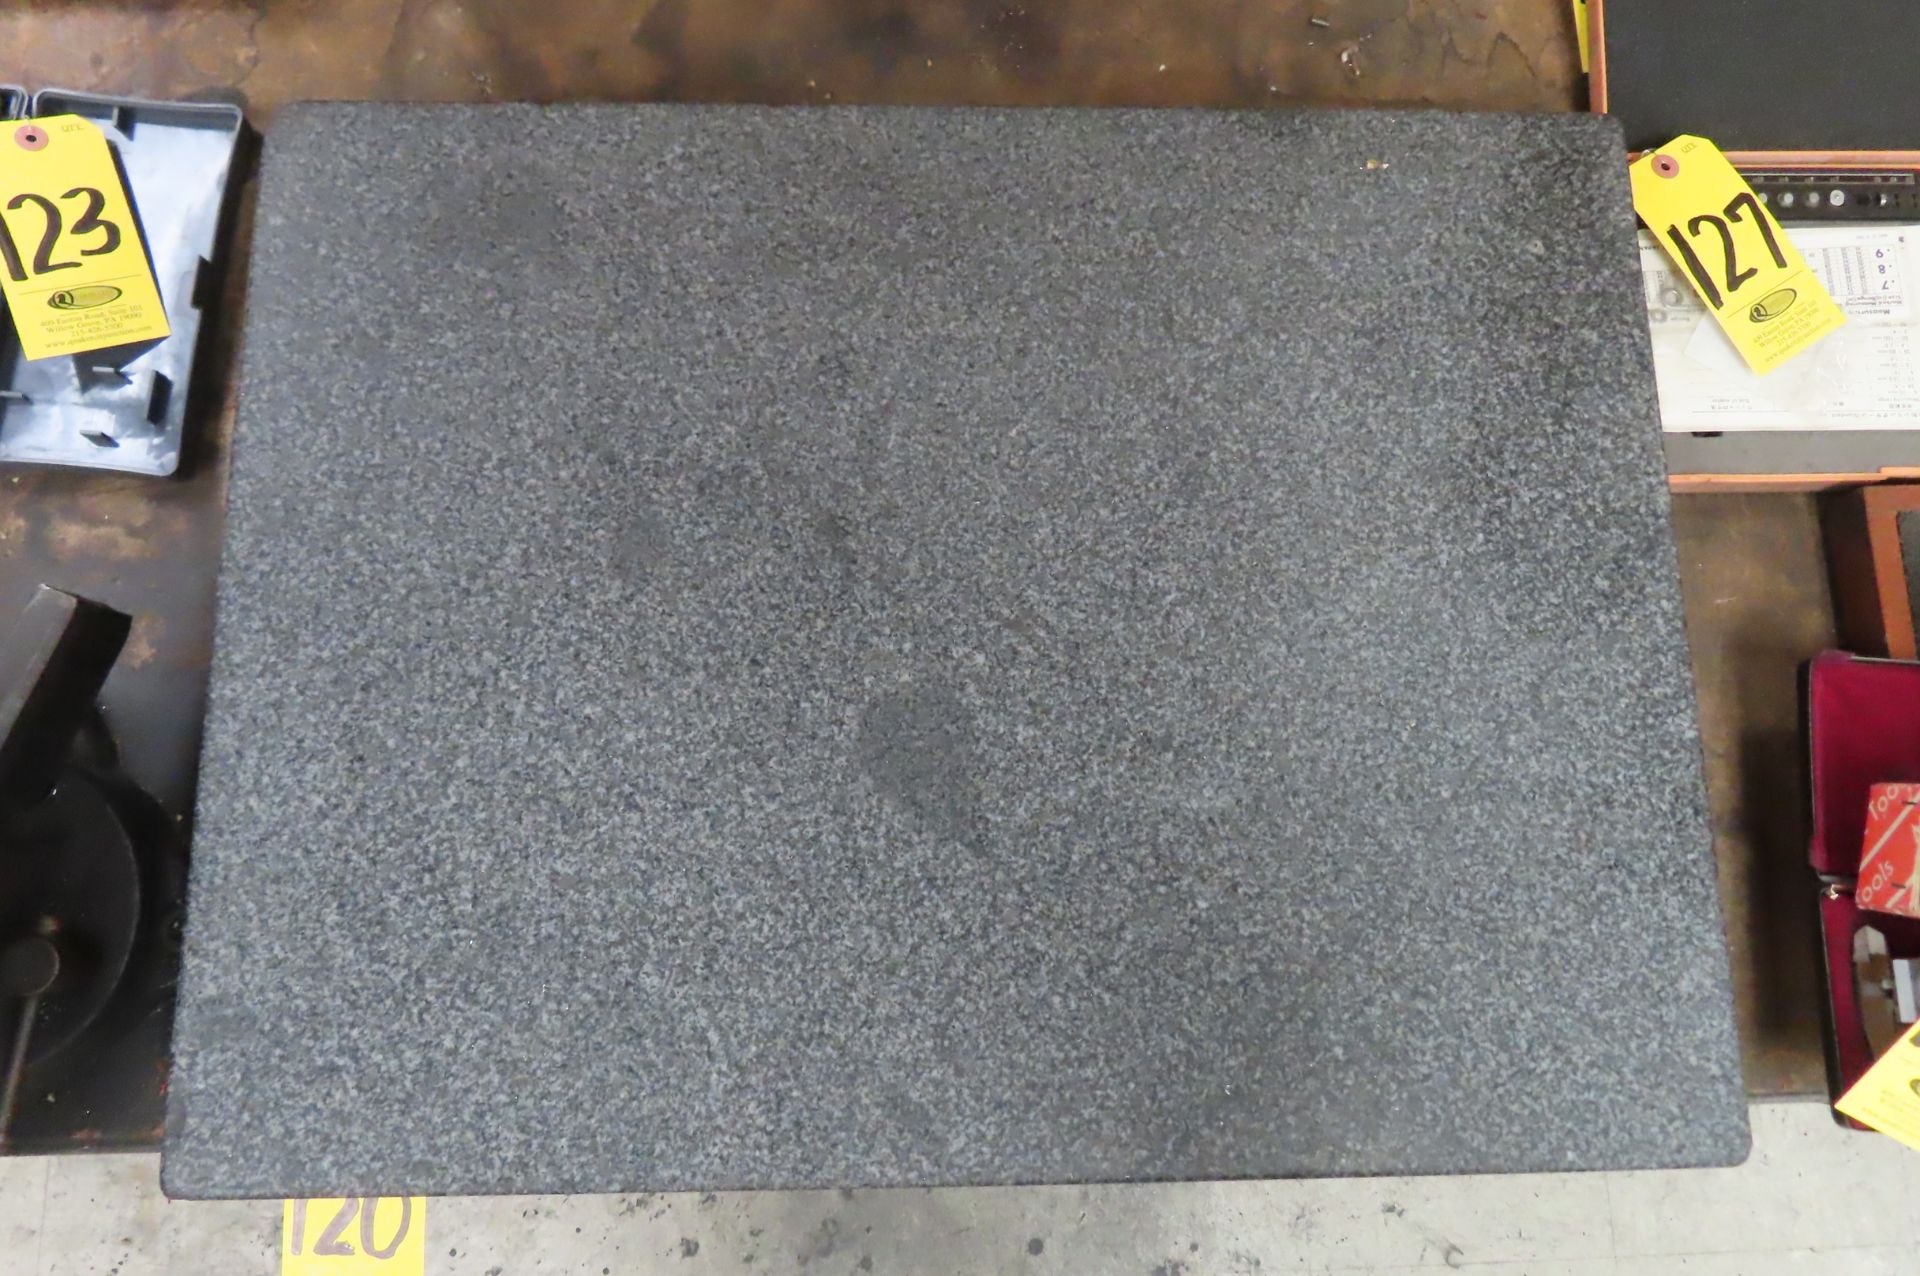 24 X 18 X 3 IN. PRECISION GRANITE SURFACE PLATE - Image 2 of 2